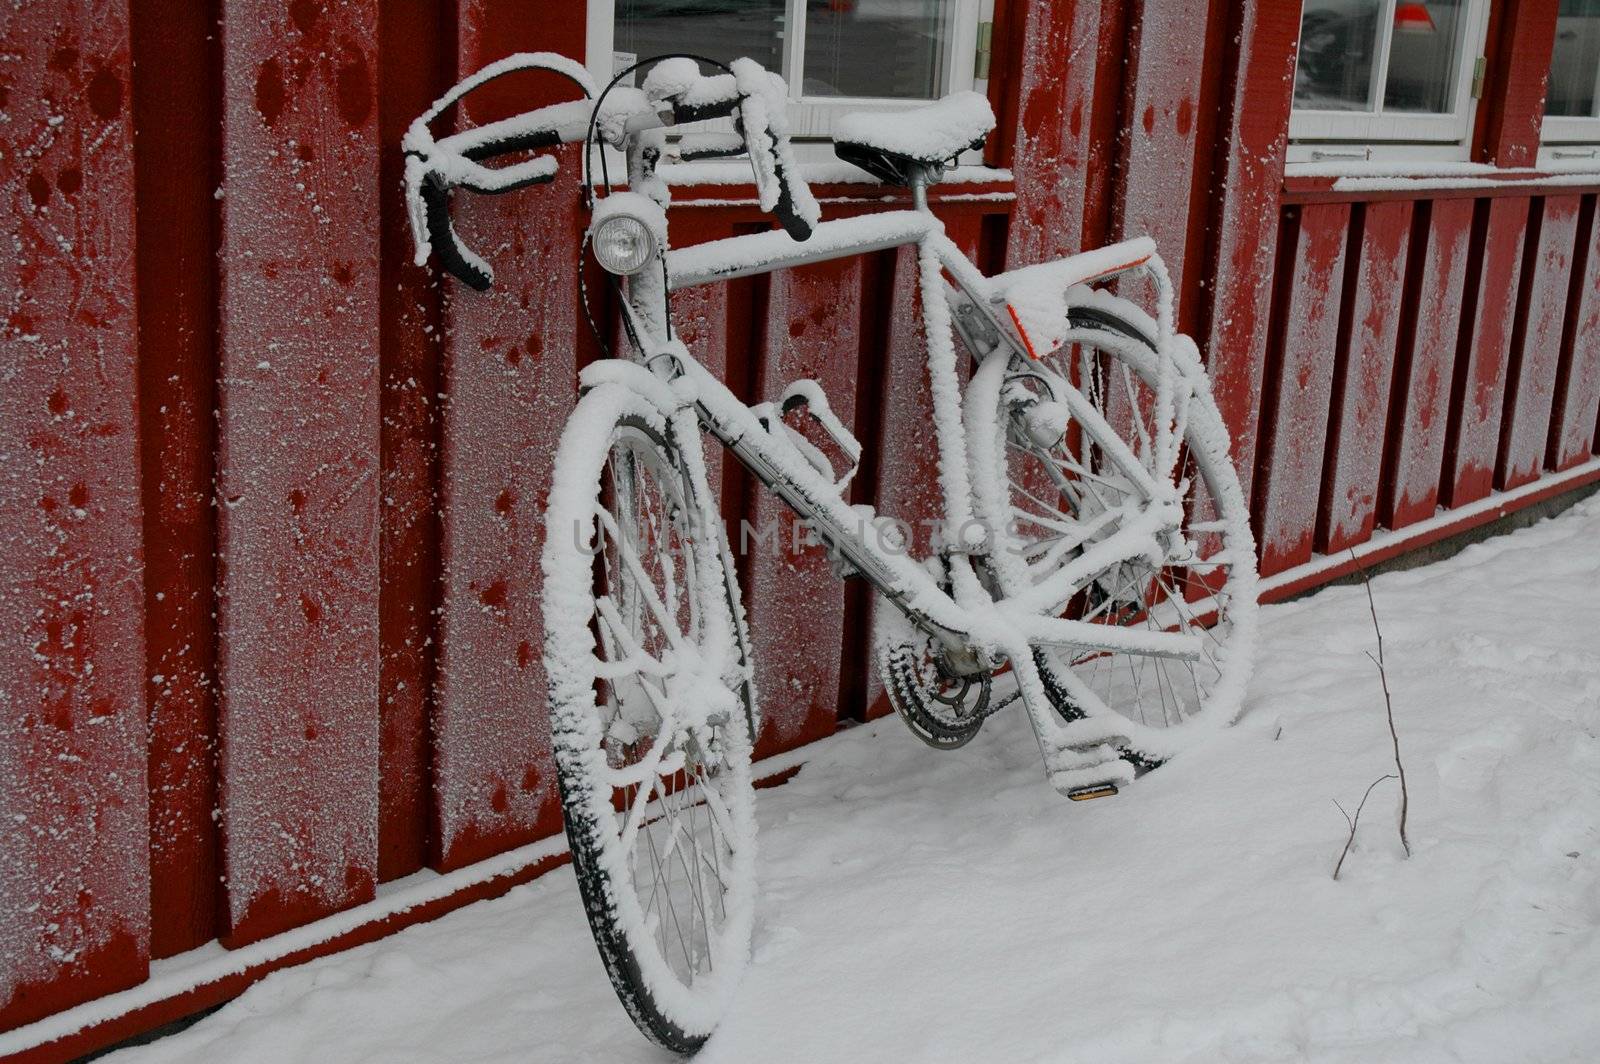 Left on a winter parking of bicycles in snowfall